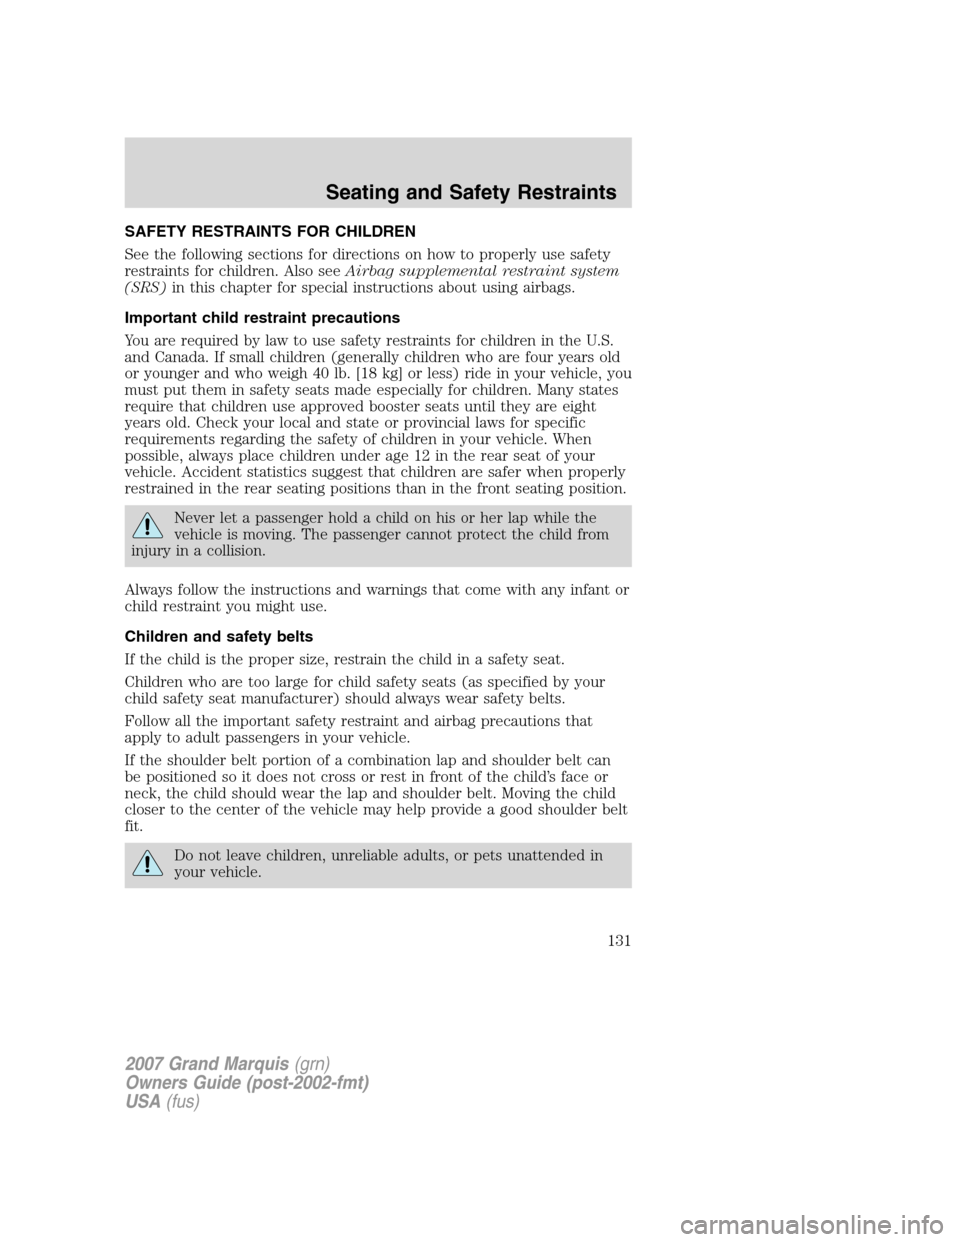 Mercury Grand Marquis 2007  Owners Manuals SAFETY RESTRAINTS FOR CHILDREN
See the following sections for directions on how to properly use safety
restraints for children. Also seeAirbag supplemental restraint system
(SRS)in this chapter for sp